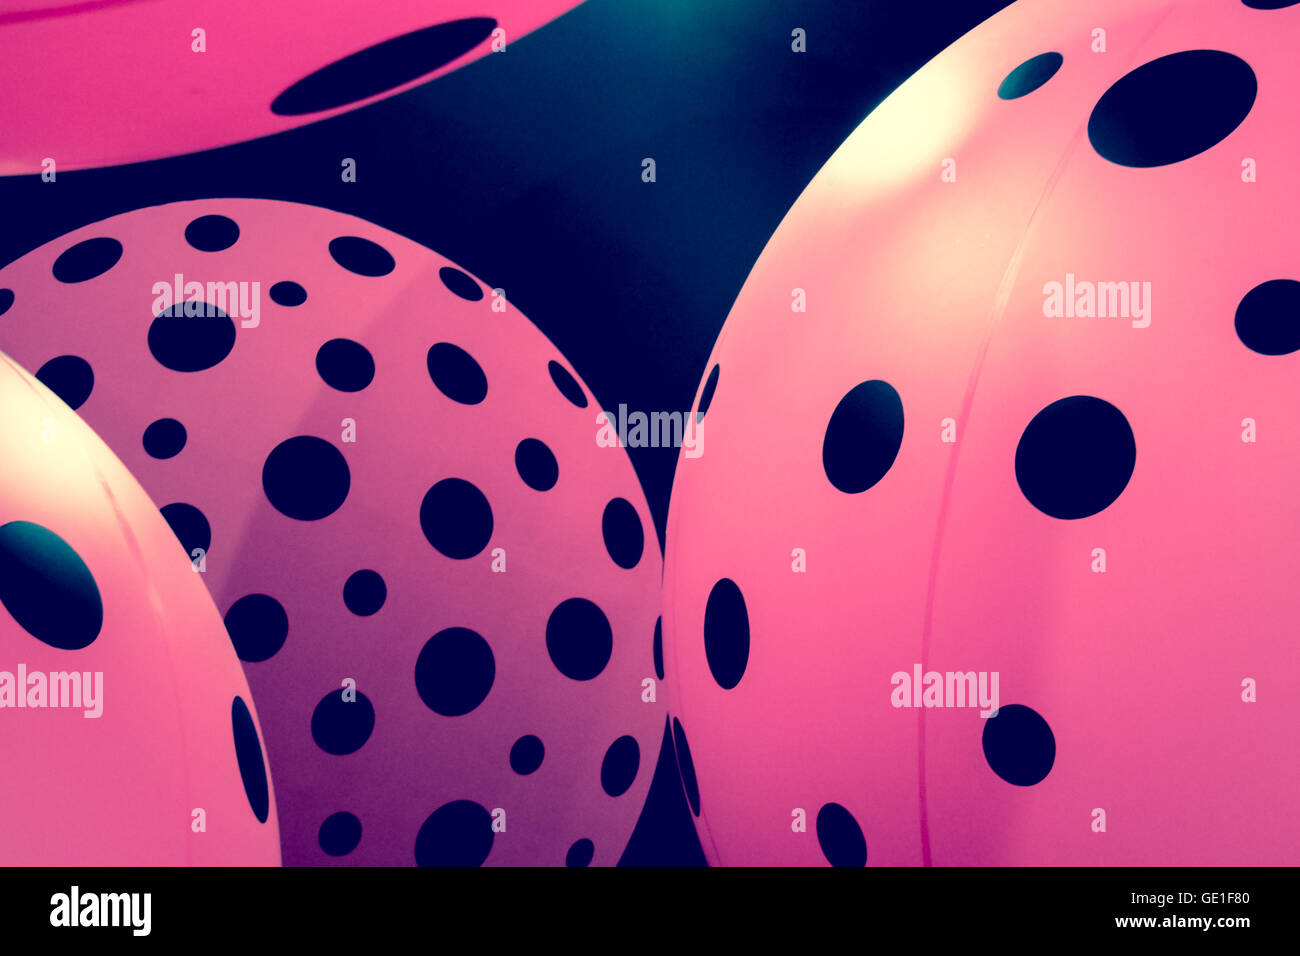 Pink and black spotted balls Stock Photo